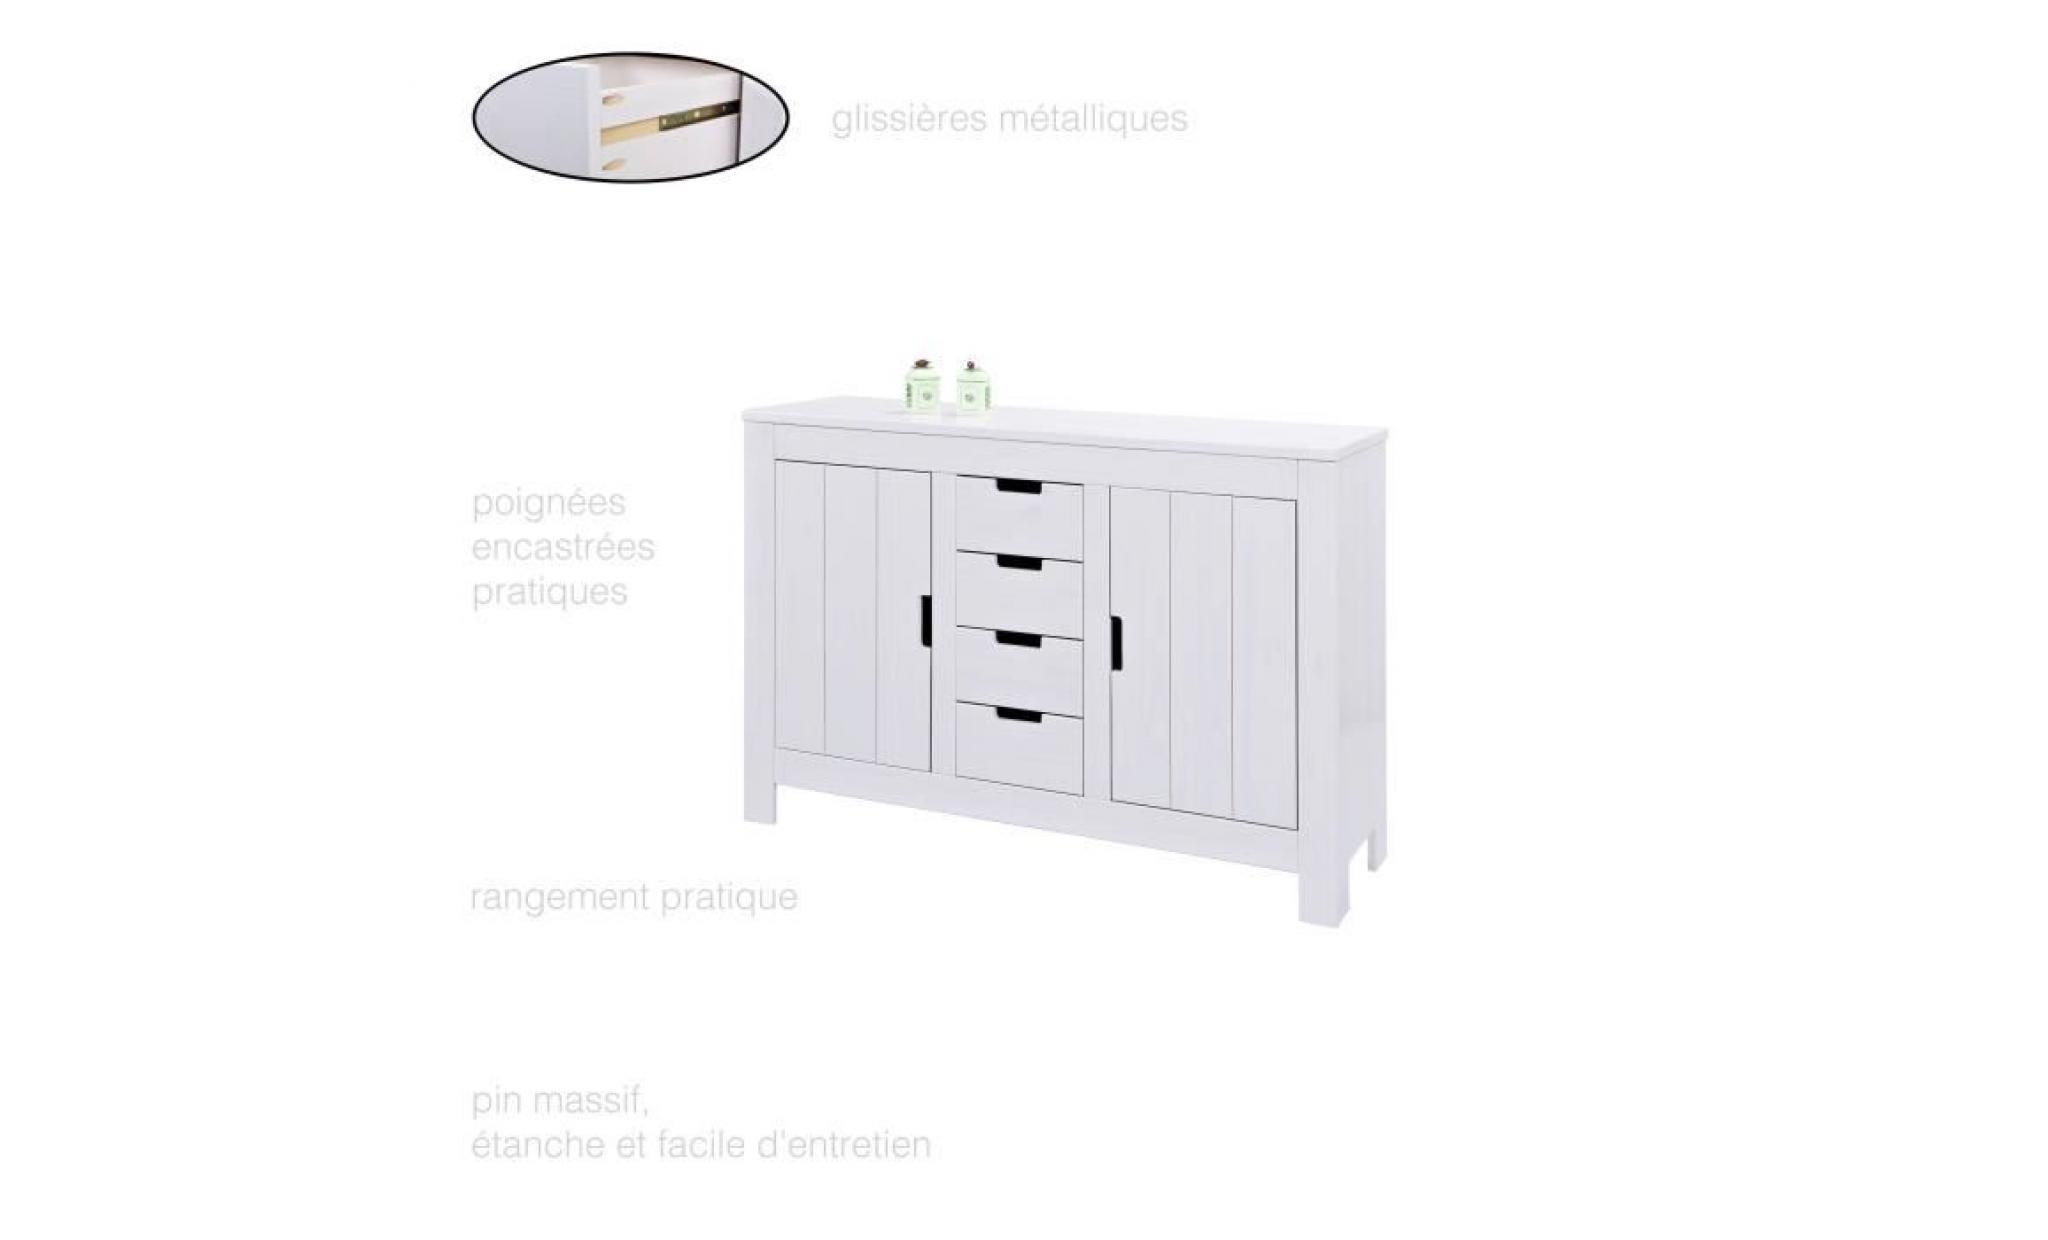 grande commode 4 tiroirs, 2 portes, commode en pin massif, commode chambre blanche, armoire commode, commode de rangement, bahut